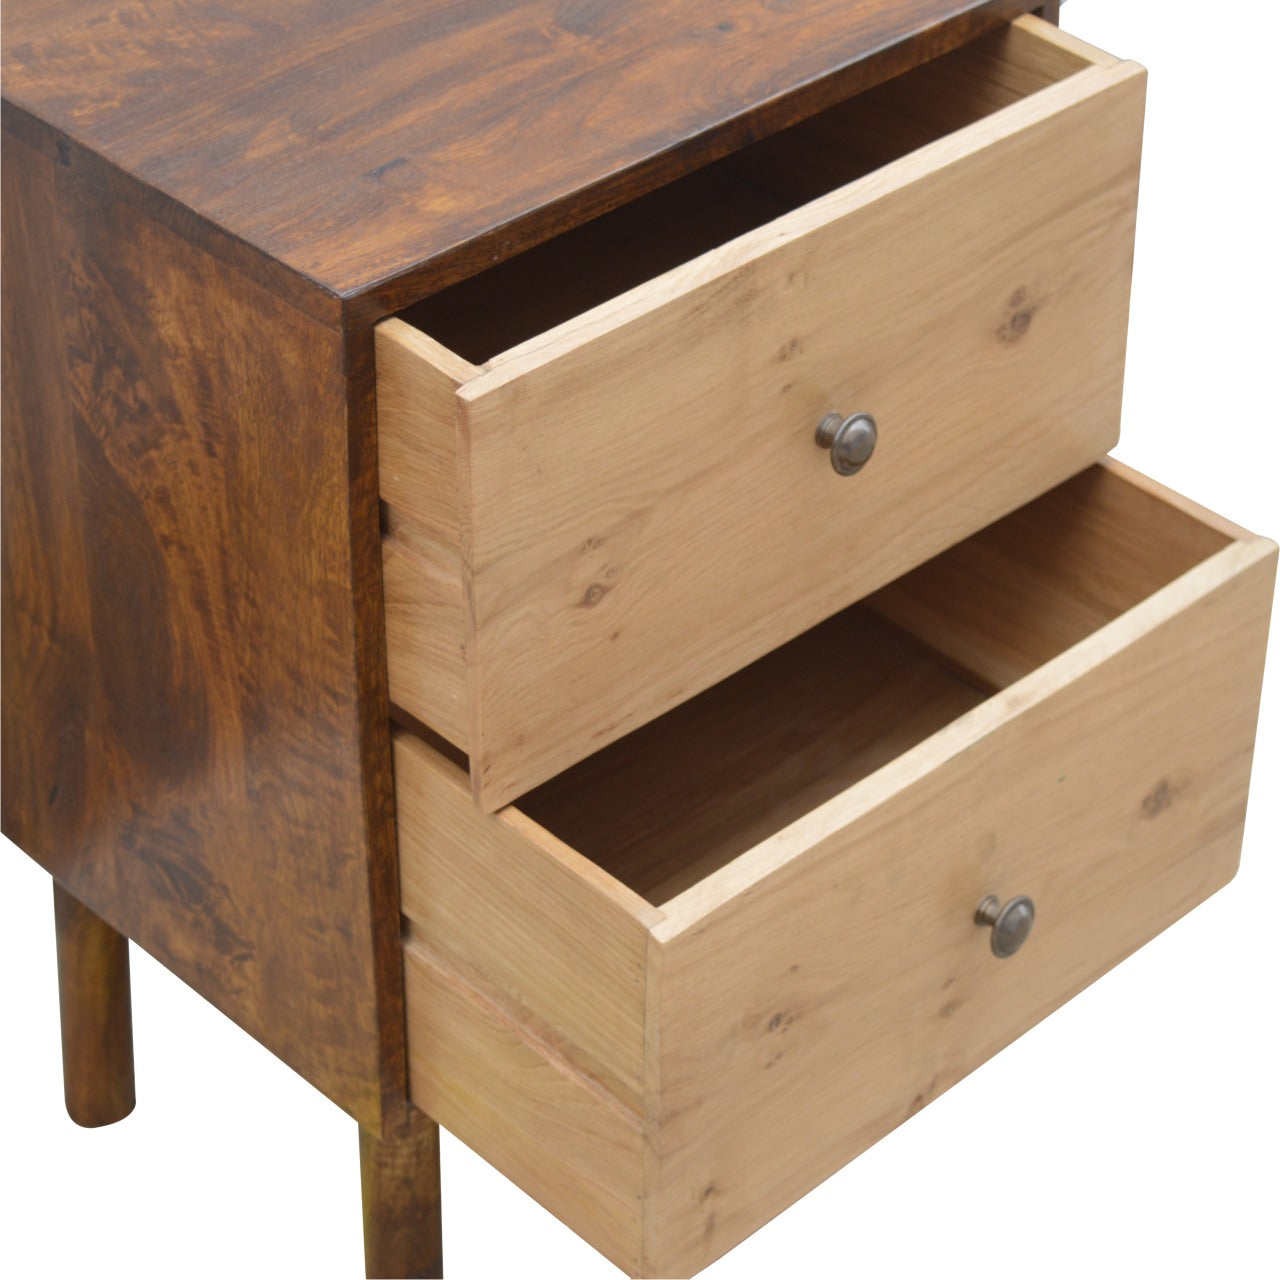 2 Drawer Unit with Oak Wood Drawer Fronts - mancavesuperstore